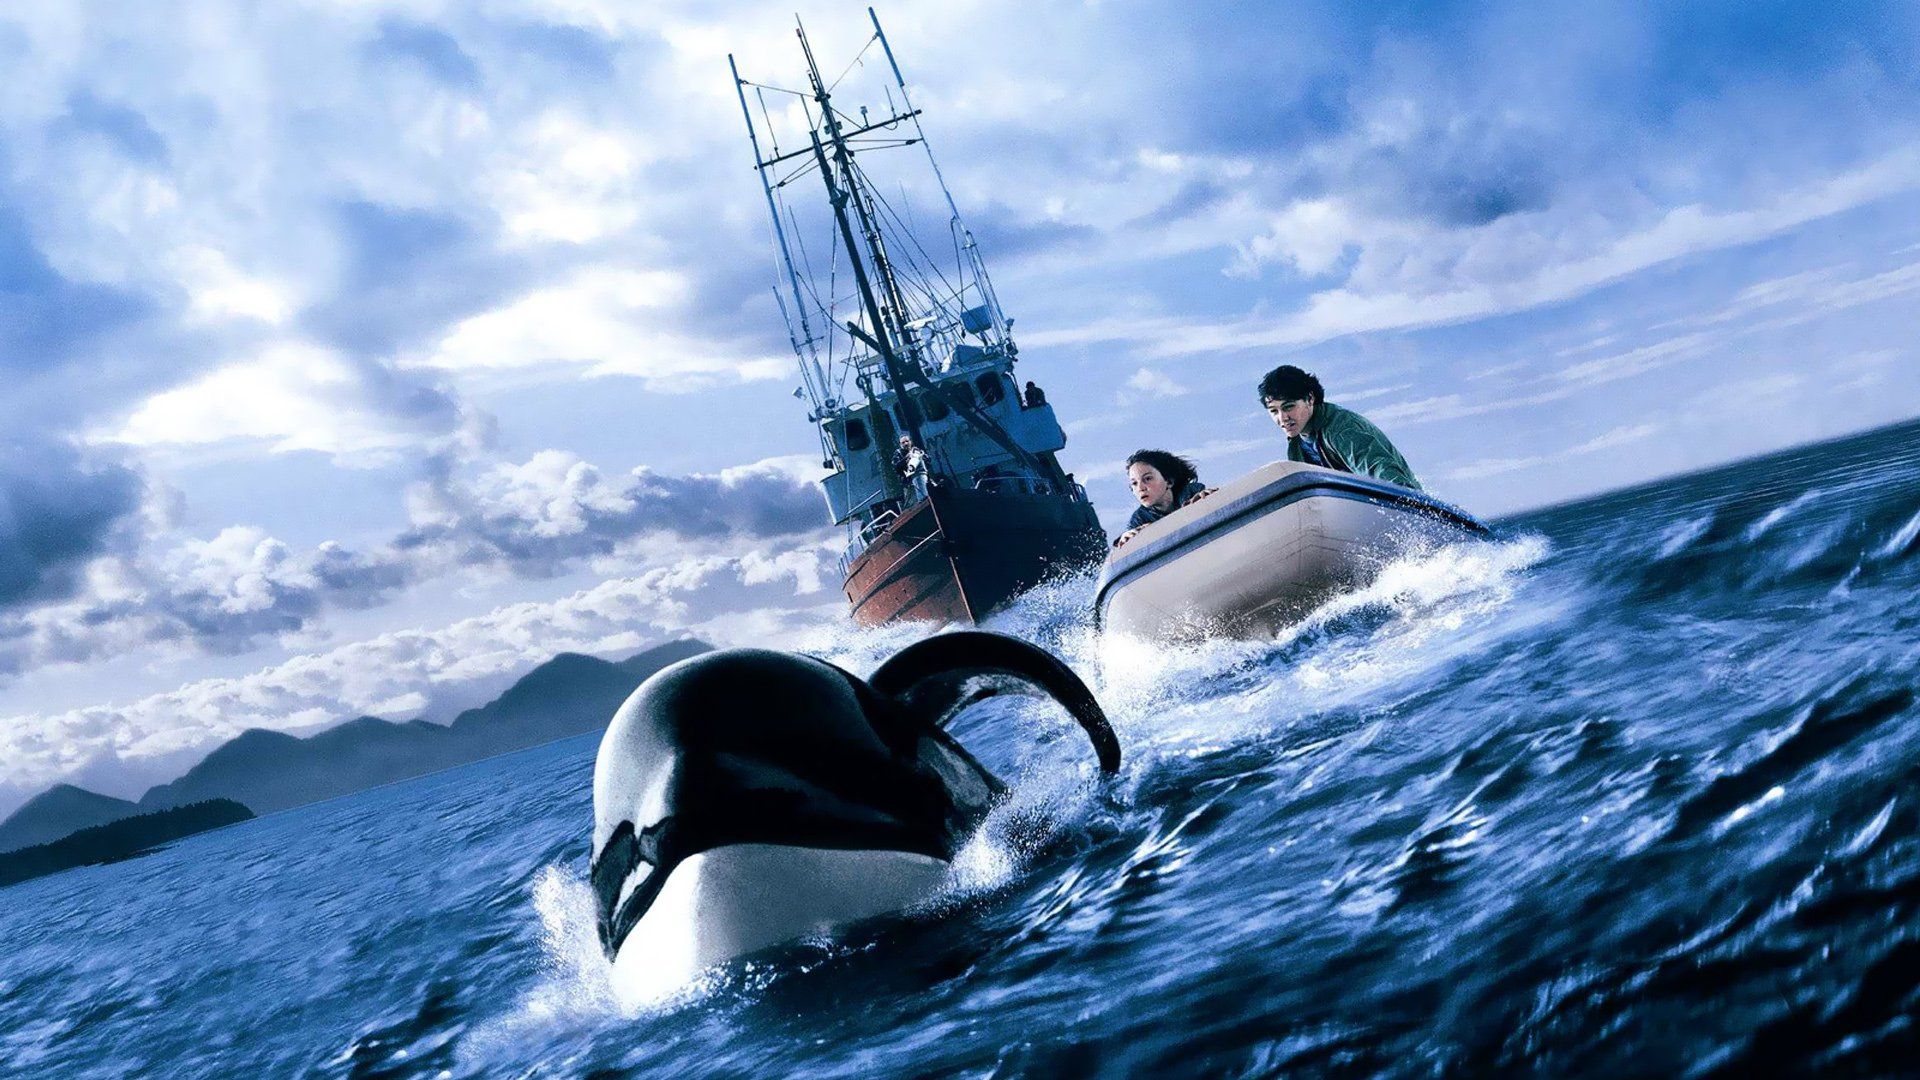 Sauvez Willy Free Willy Wallpaper 